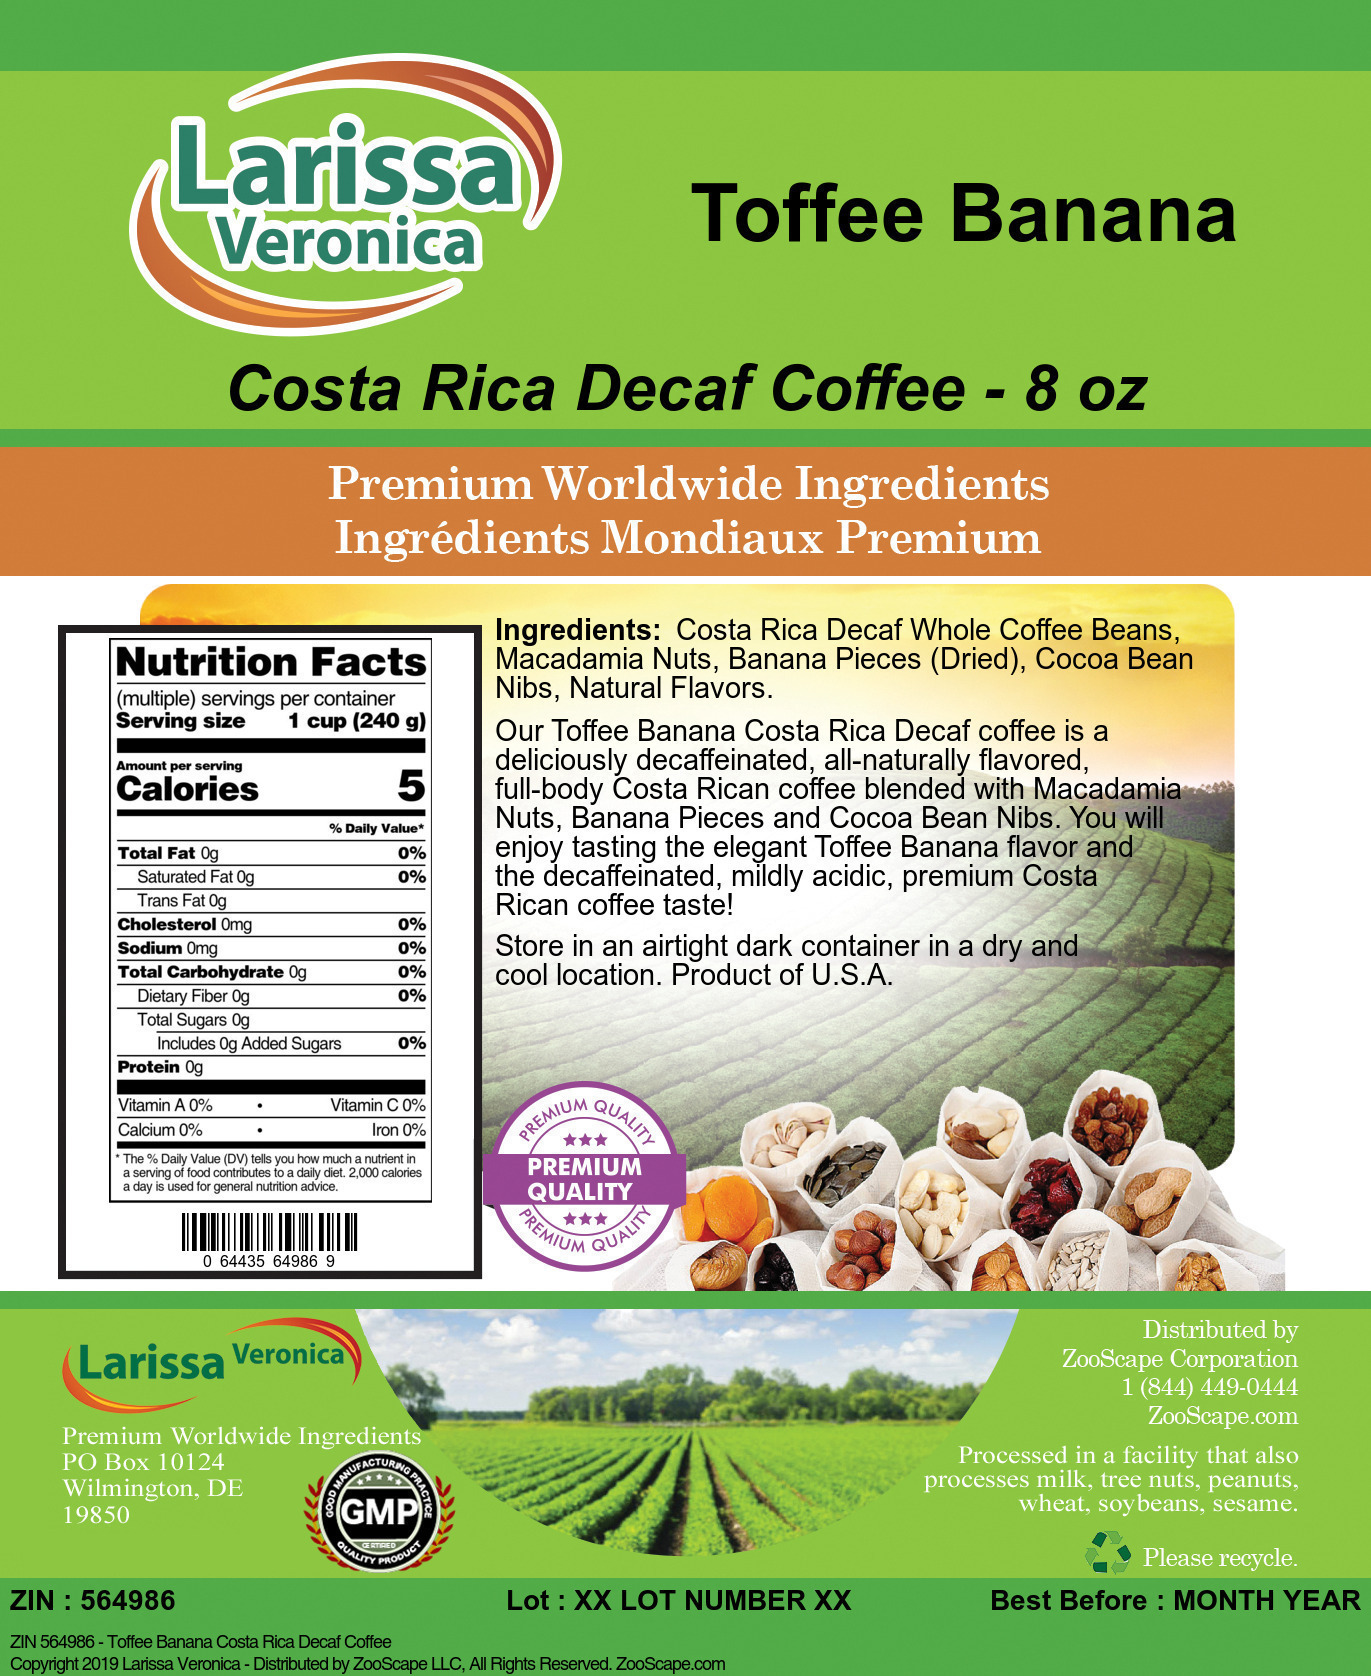 Toffee Banana Costa Rica Decaf Coffee - Label